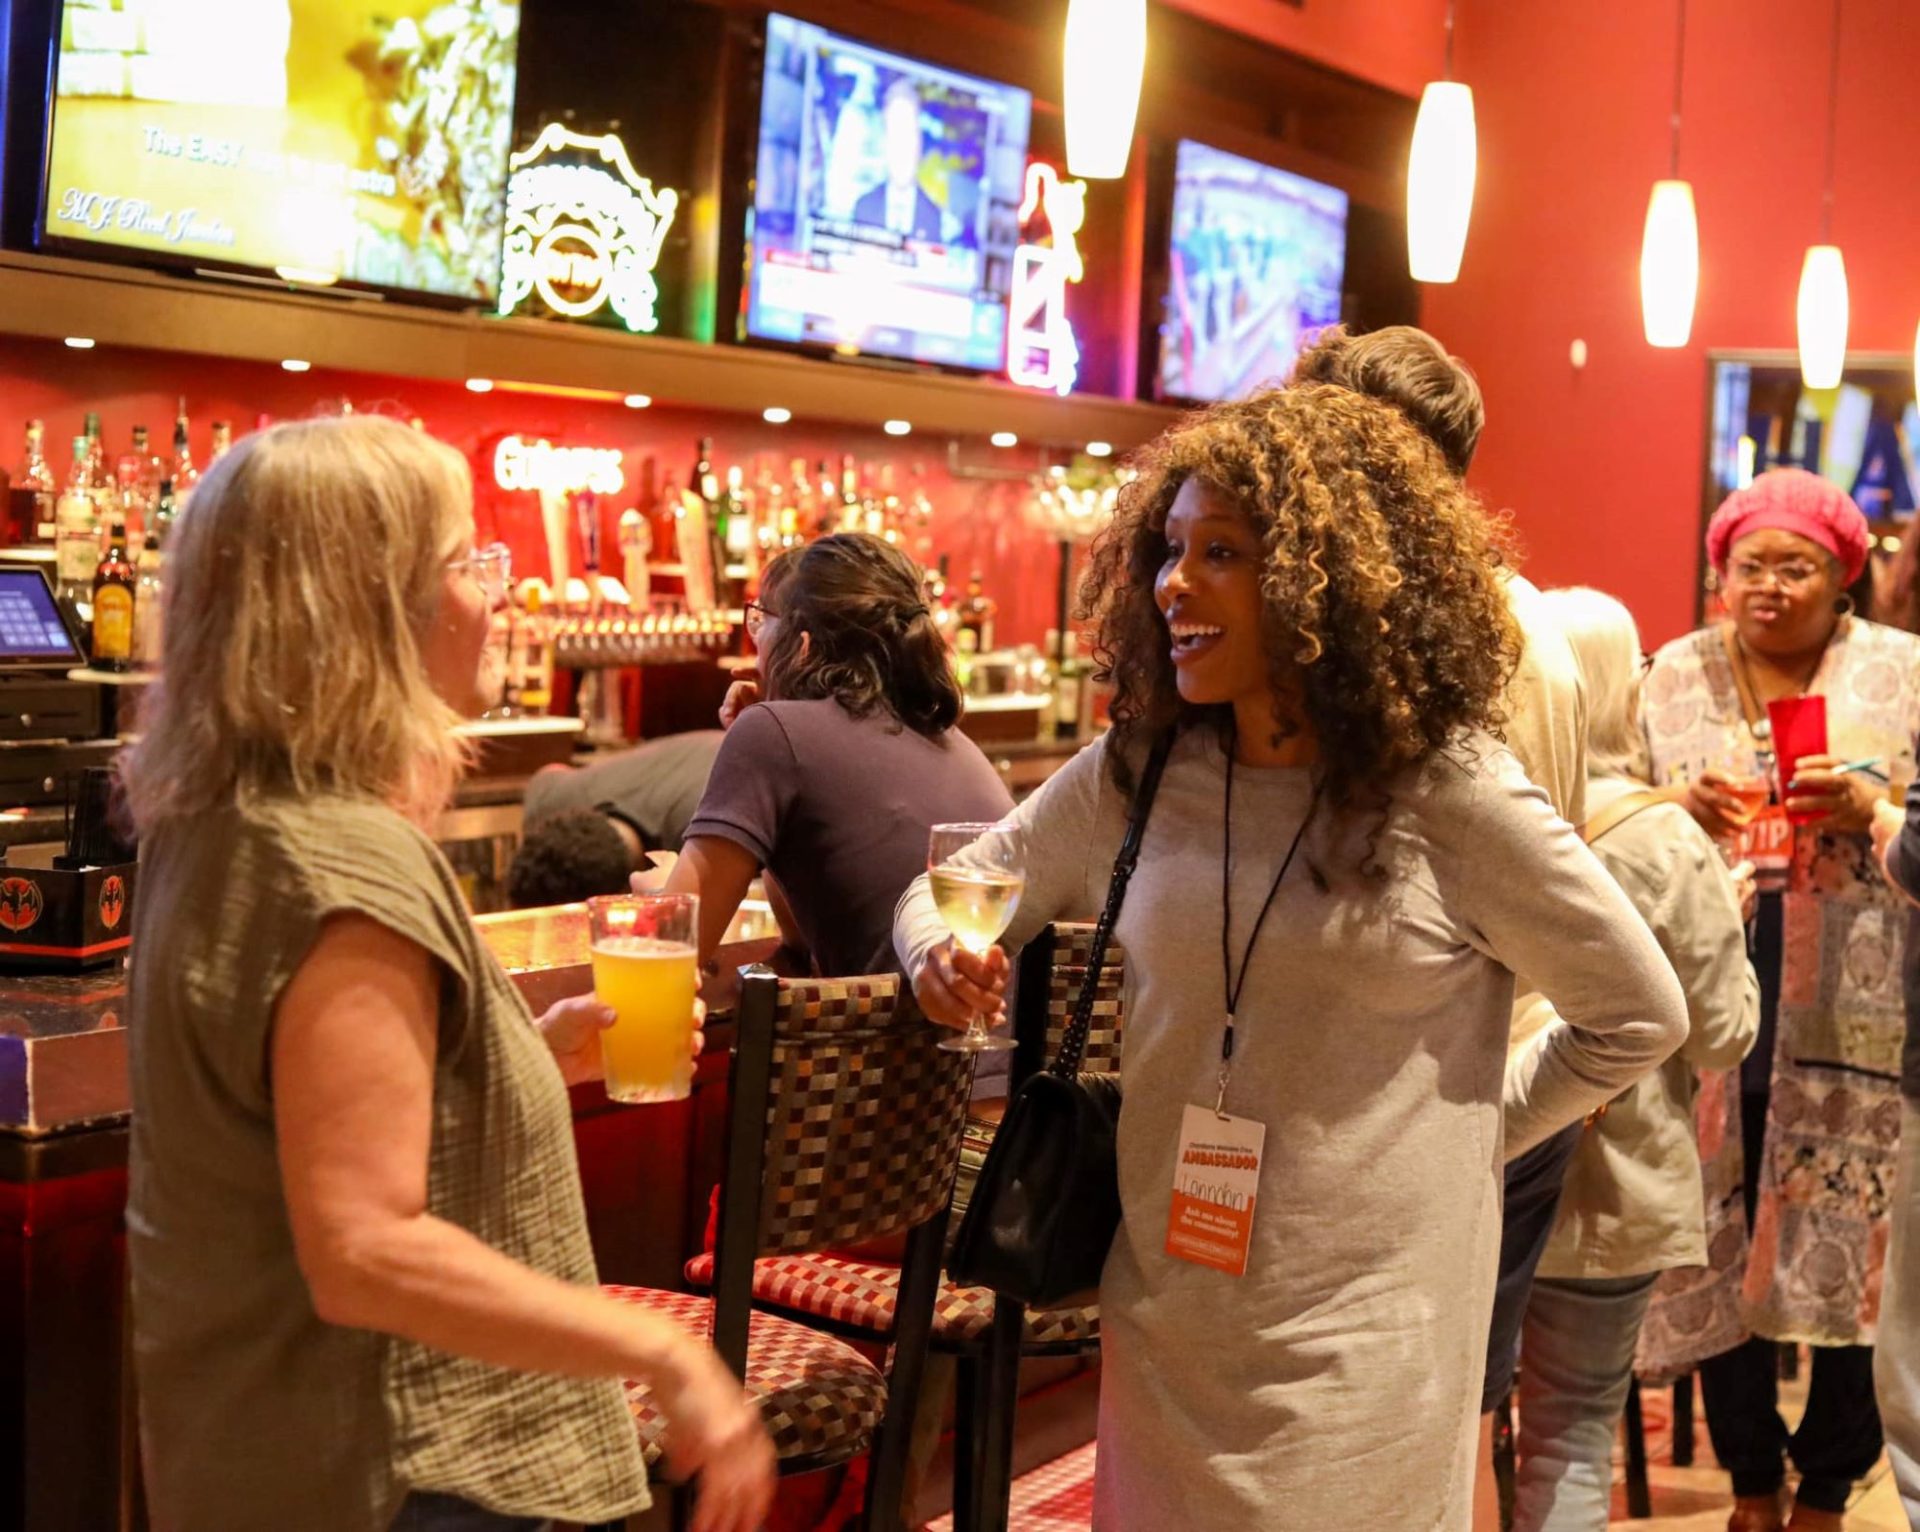 A Black woman holding a glass of wine and a white woman holding a beer and conversing near a bar filled with people.